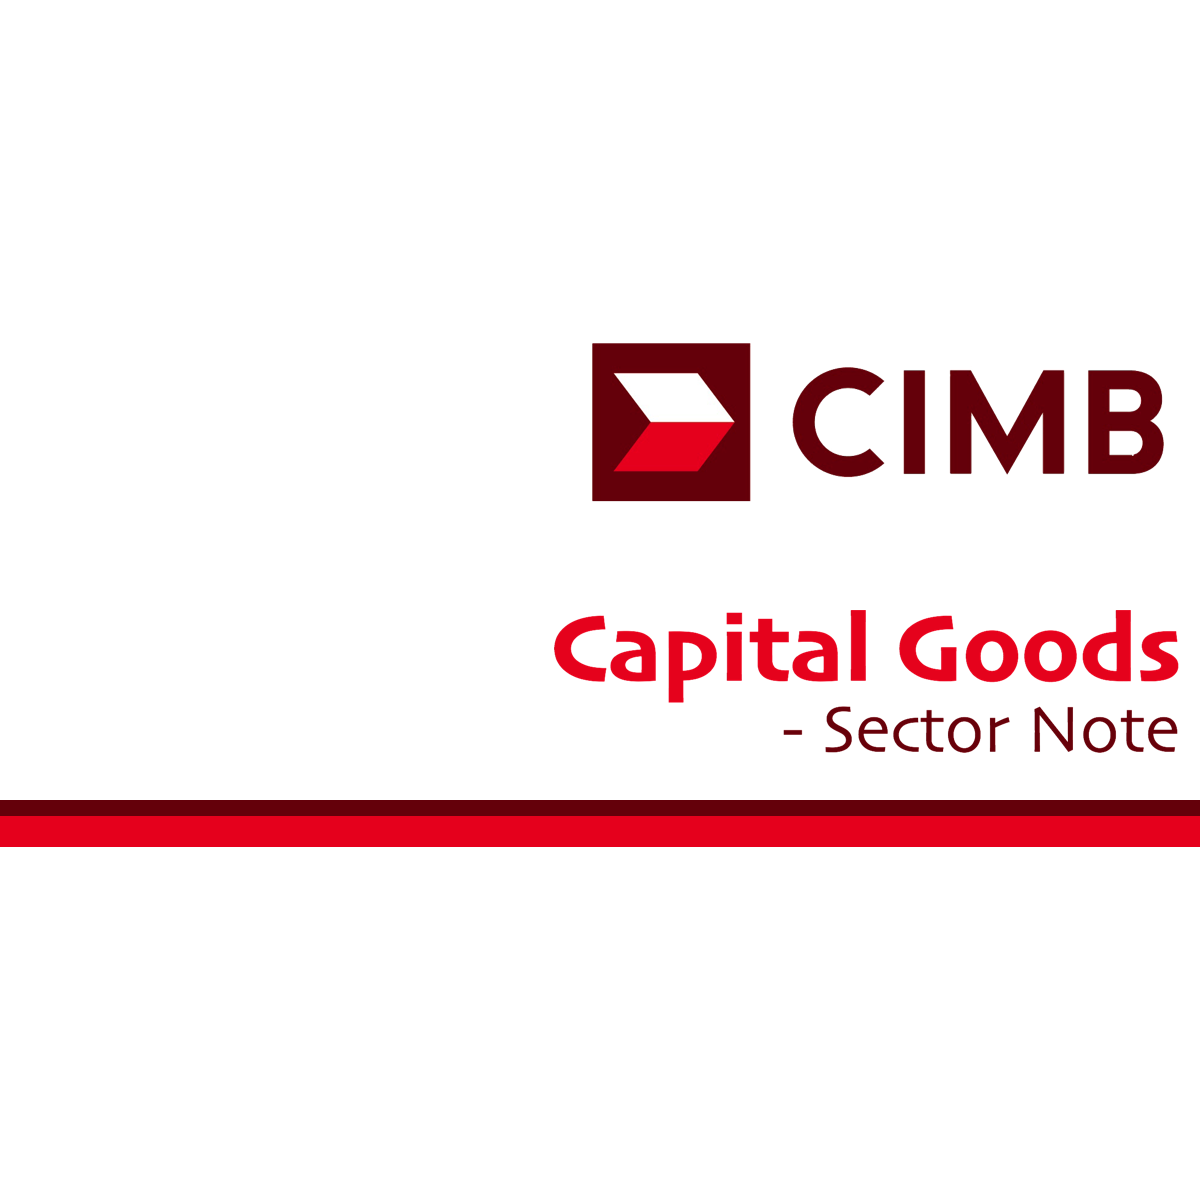 Capital Goods - CIMB Research 2017-07-21: 2Q17 Results Preview